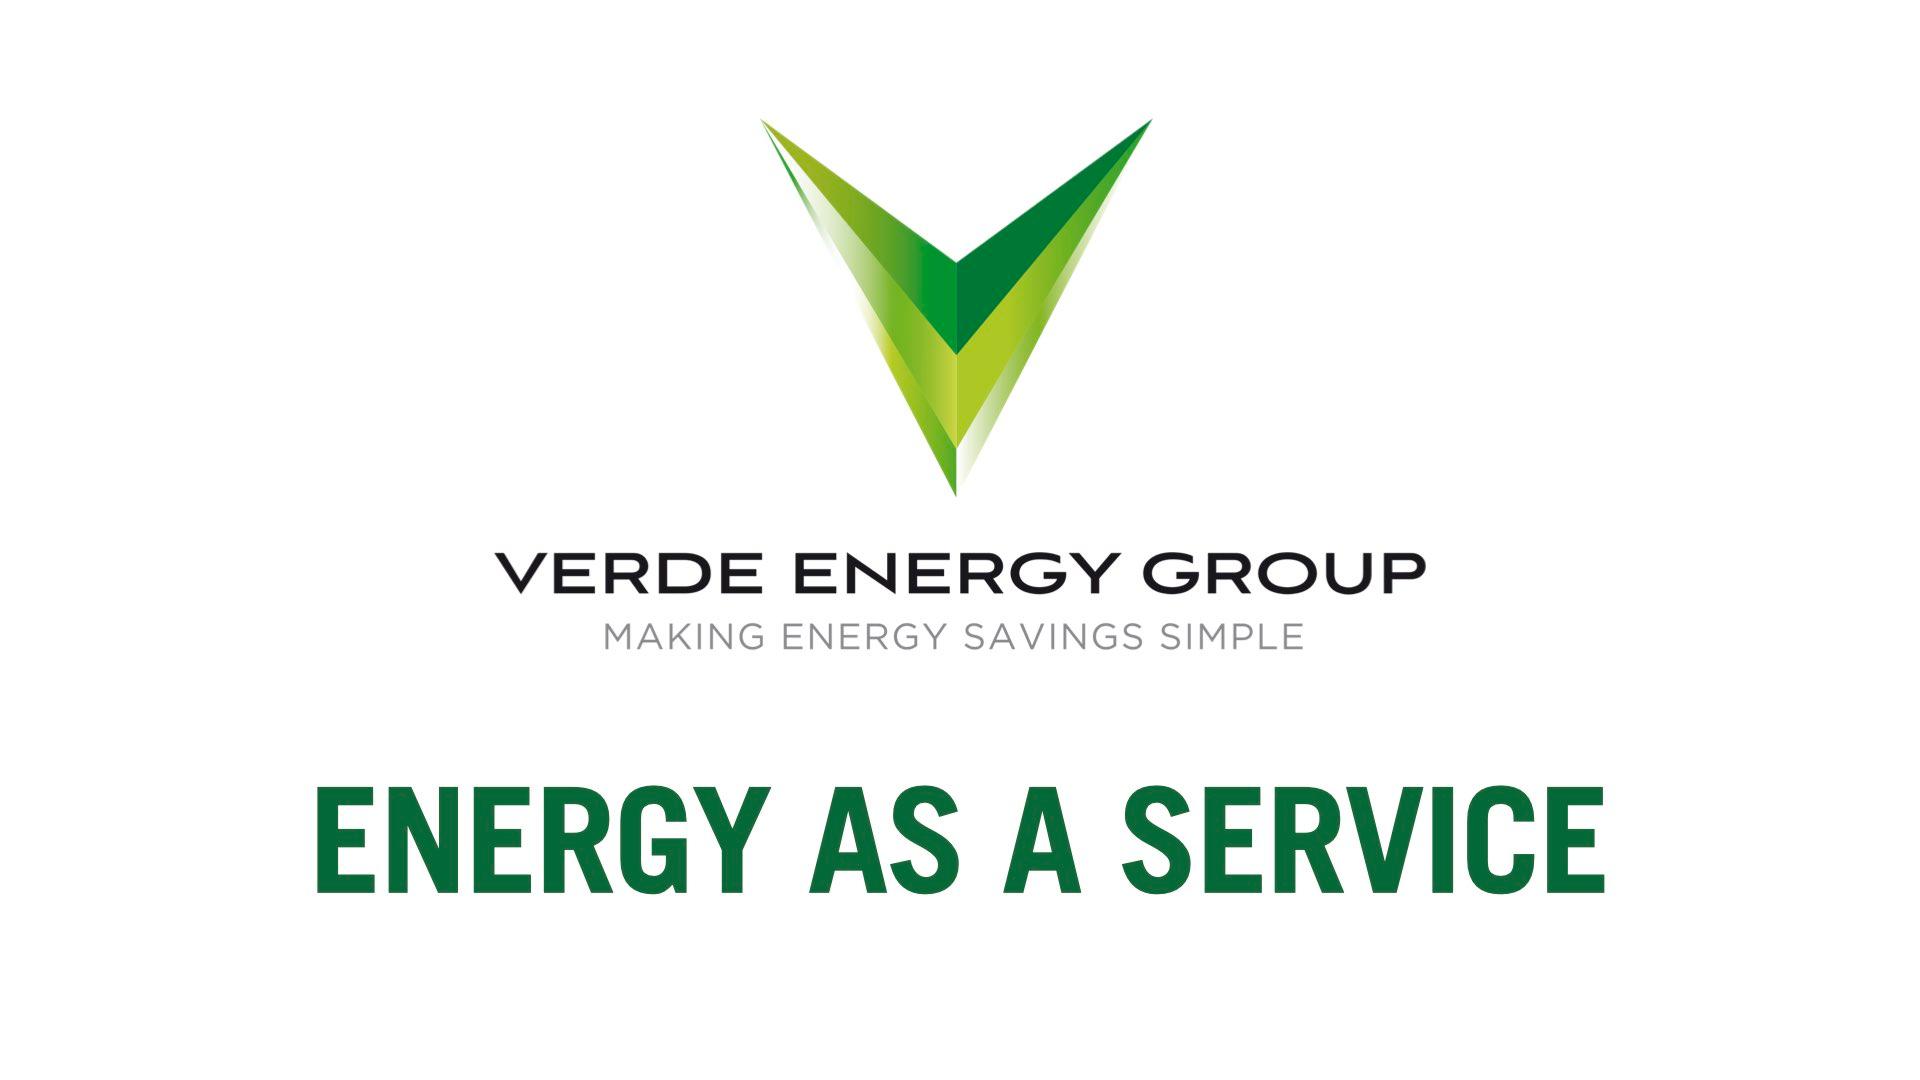 Product 3 Simple Steps to Energy as a Service - Verde Energy Group image